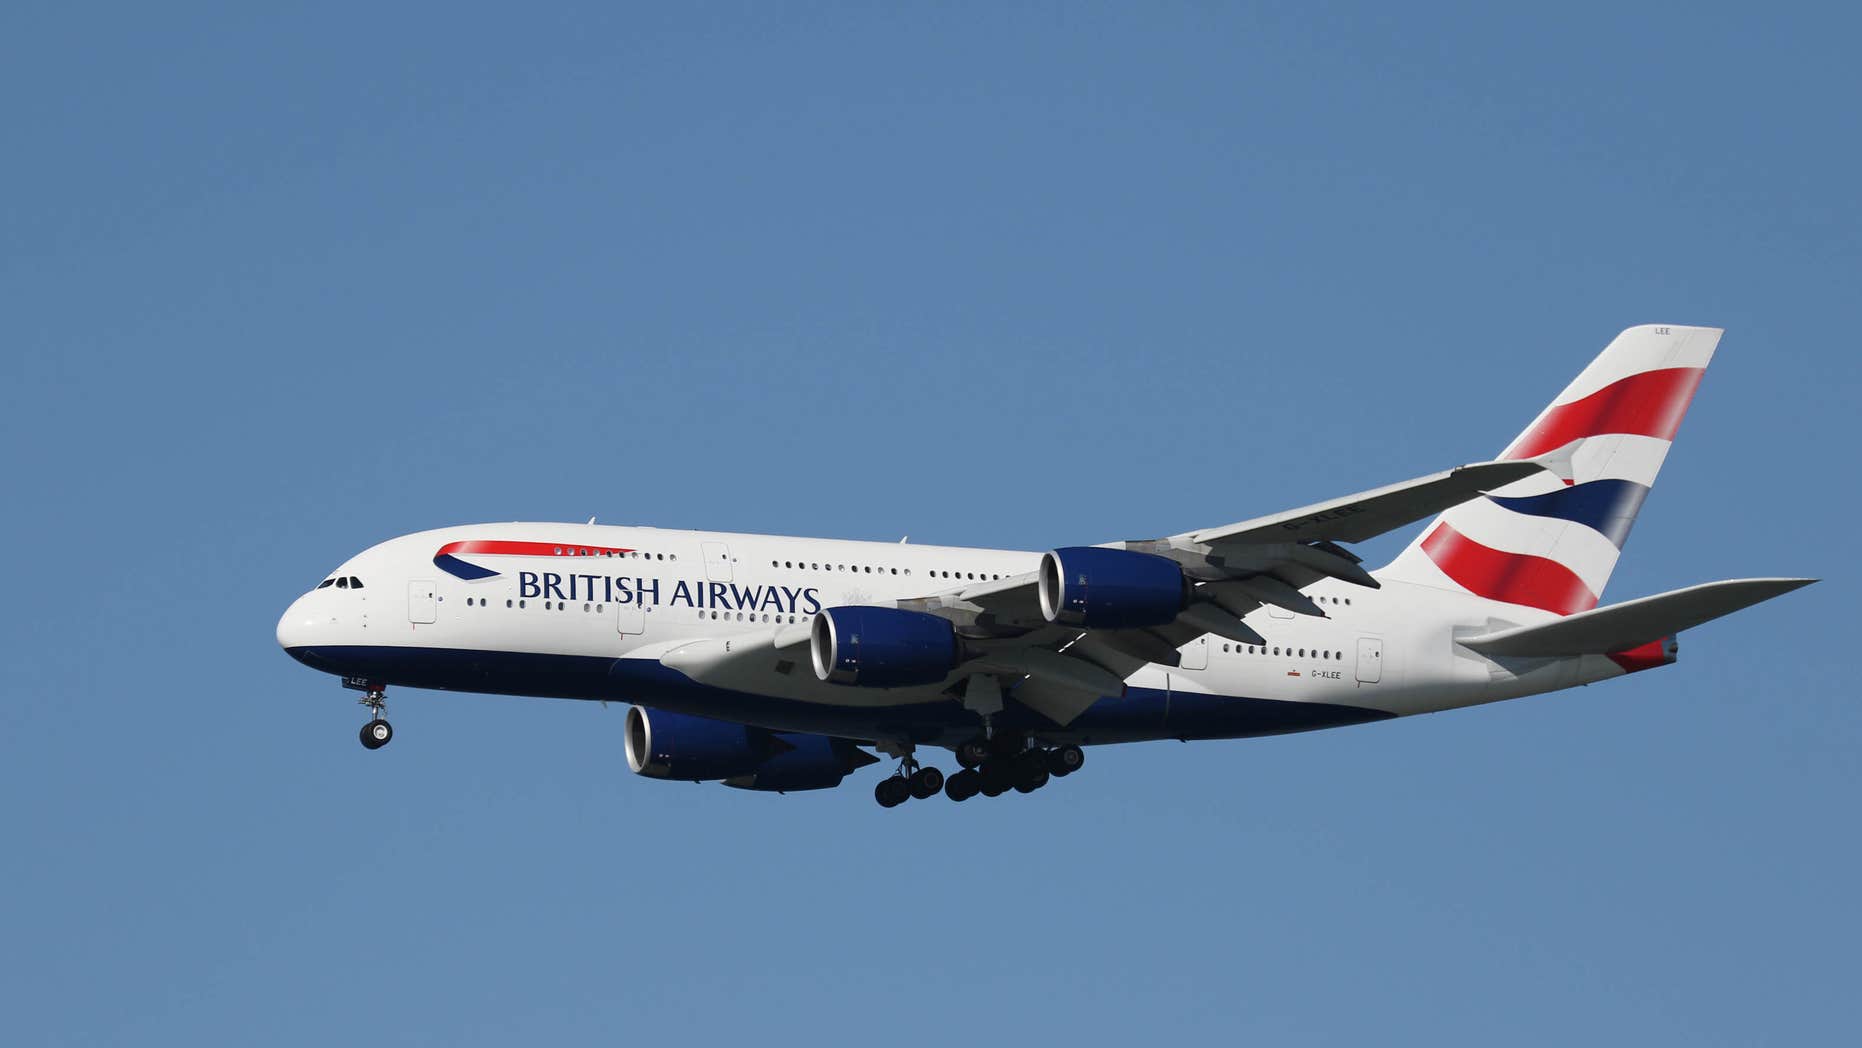 Stephen Prosser sued British Airways, saying his seat assignment had caused him extreme pain.